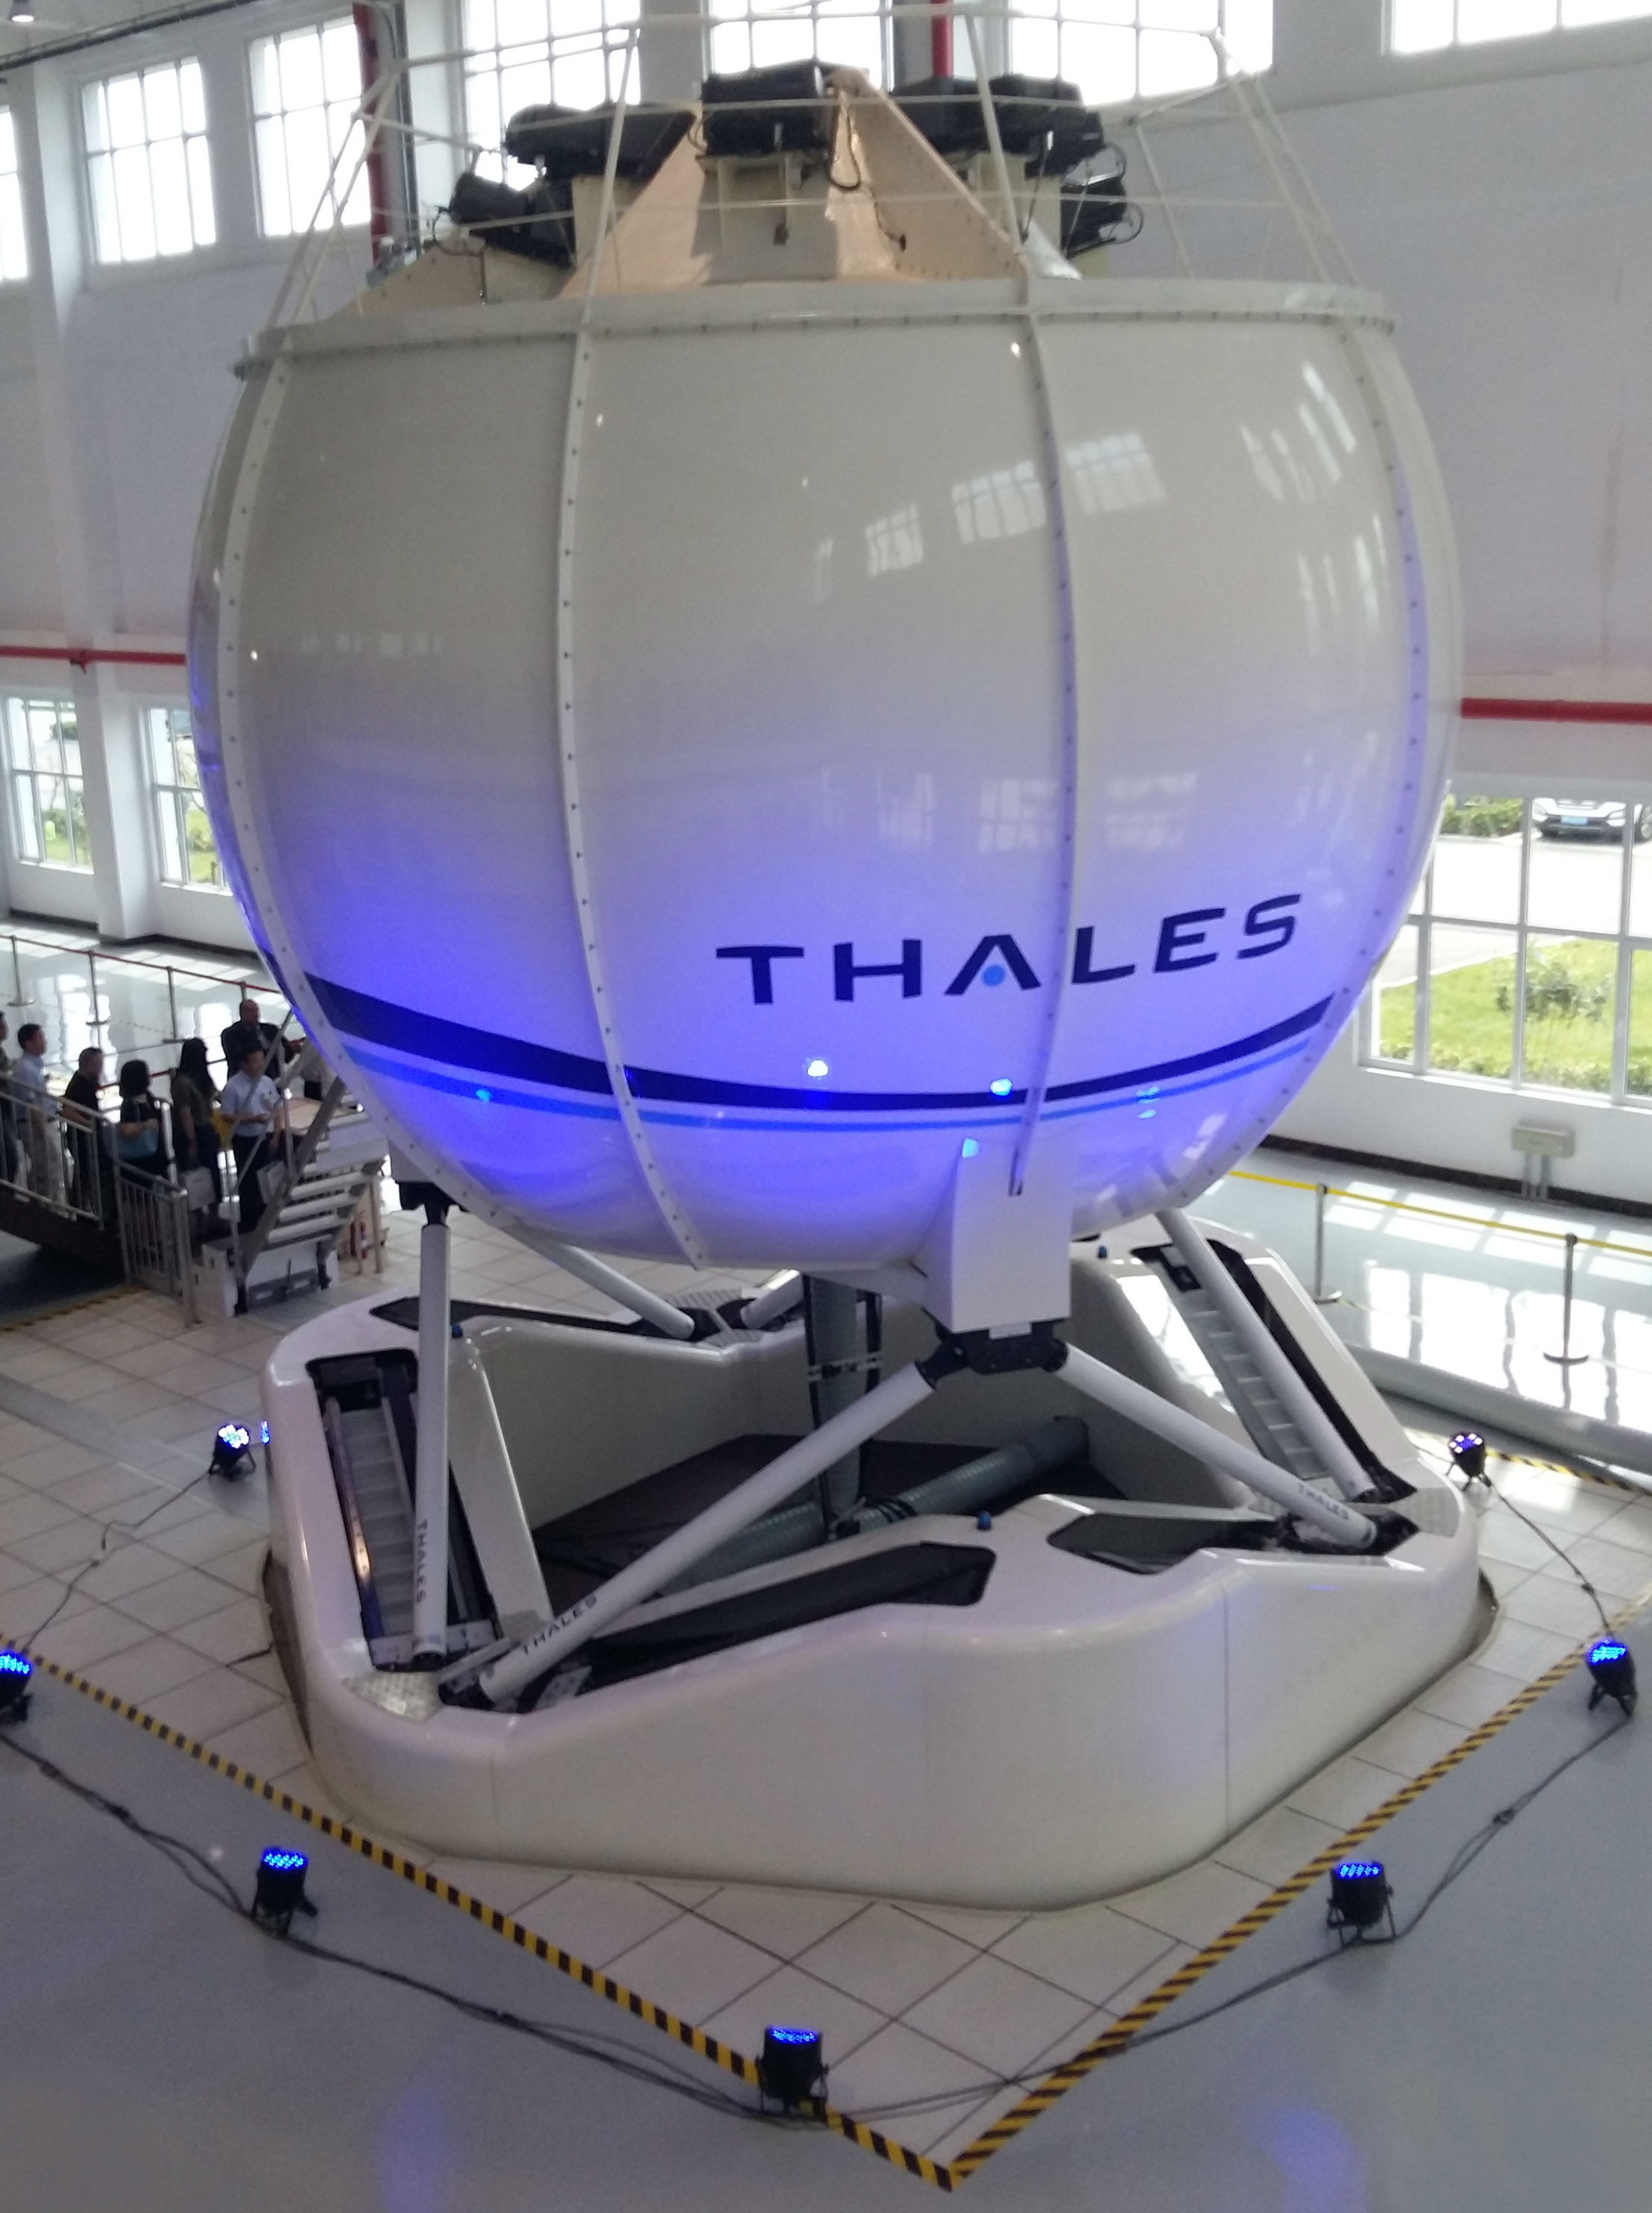 Outside view of simulator